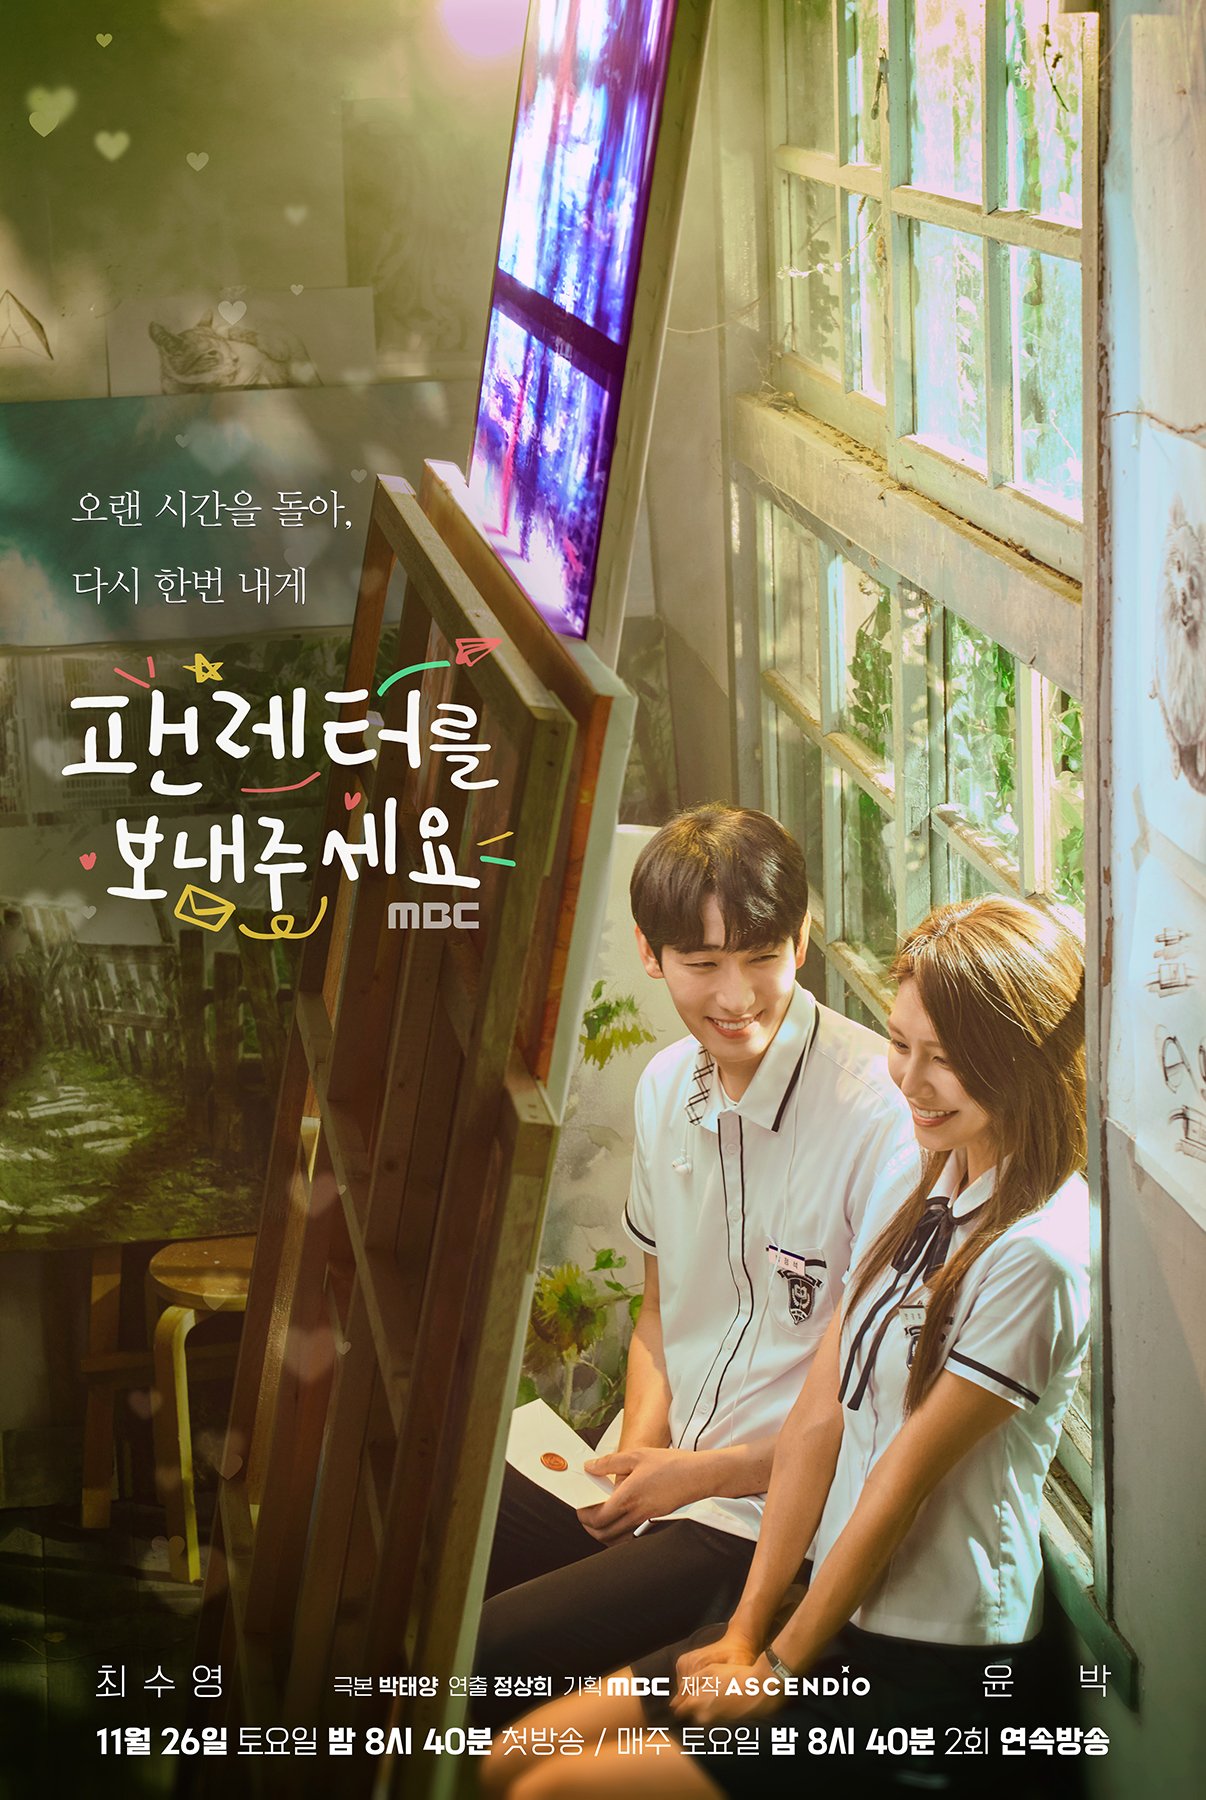 High school romance hinted in new poster for Please Send a Fan Letter